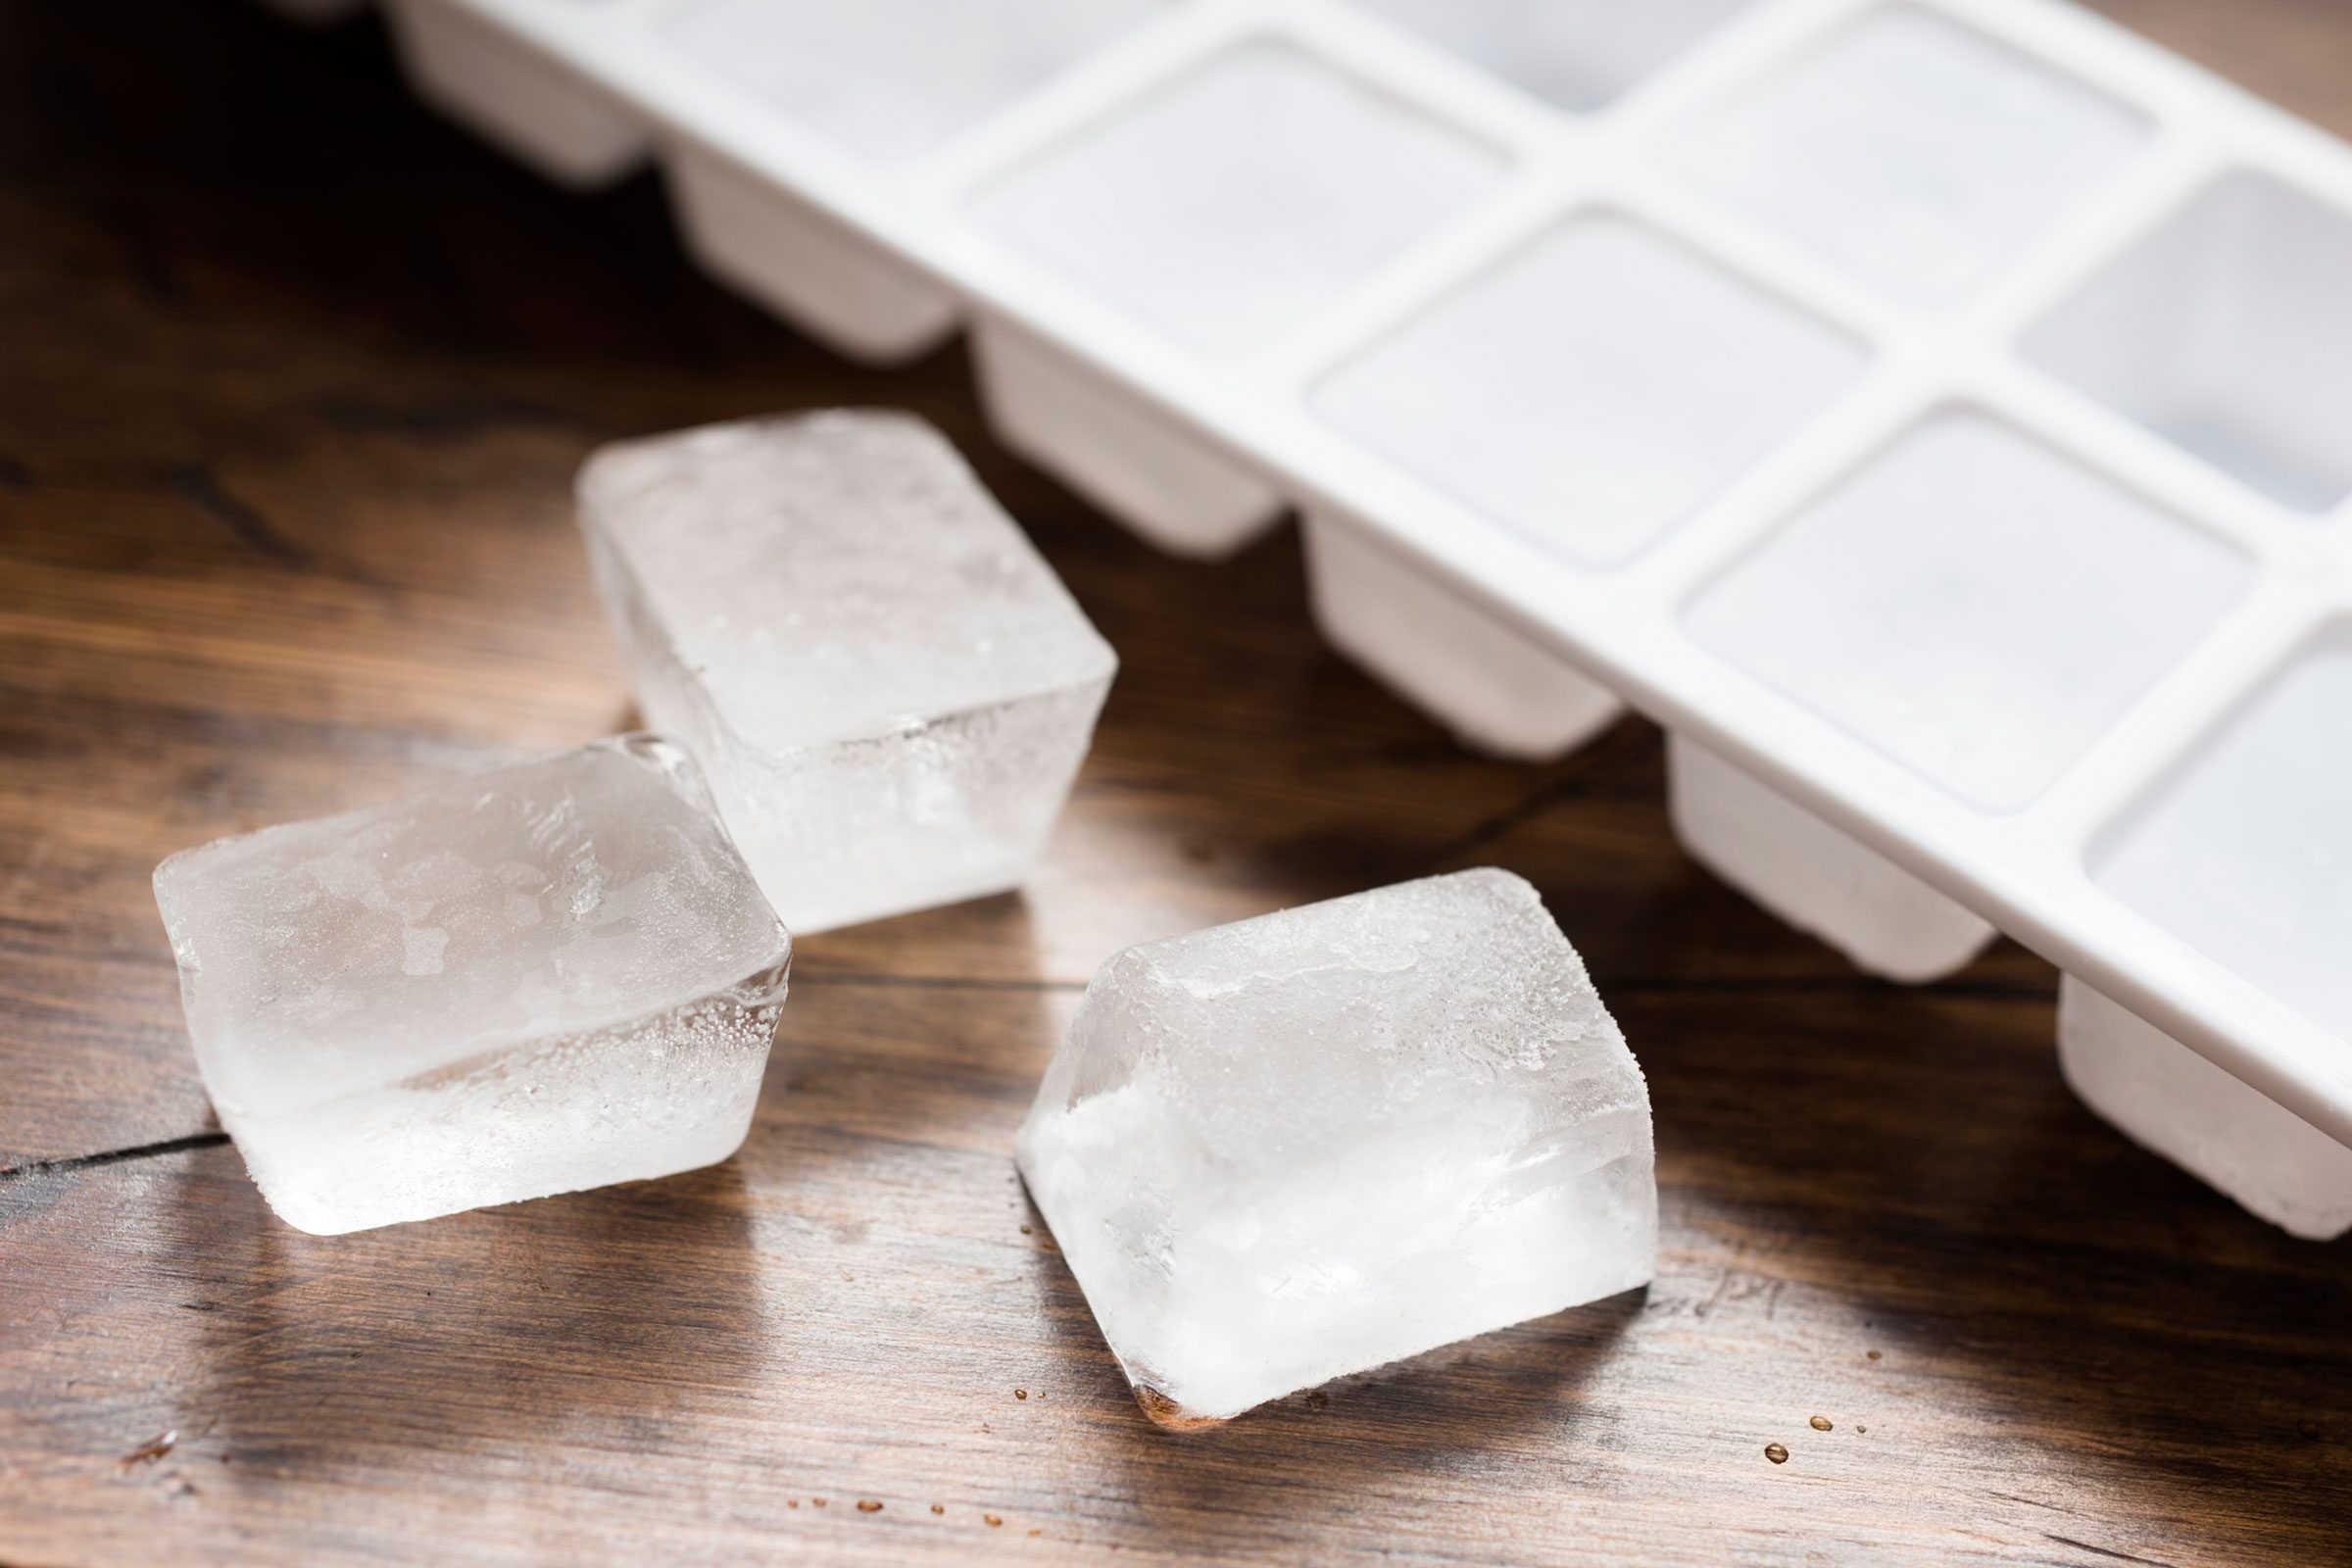 9 Weird Ice Cube Molds That Will Make Your Friends Laugh